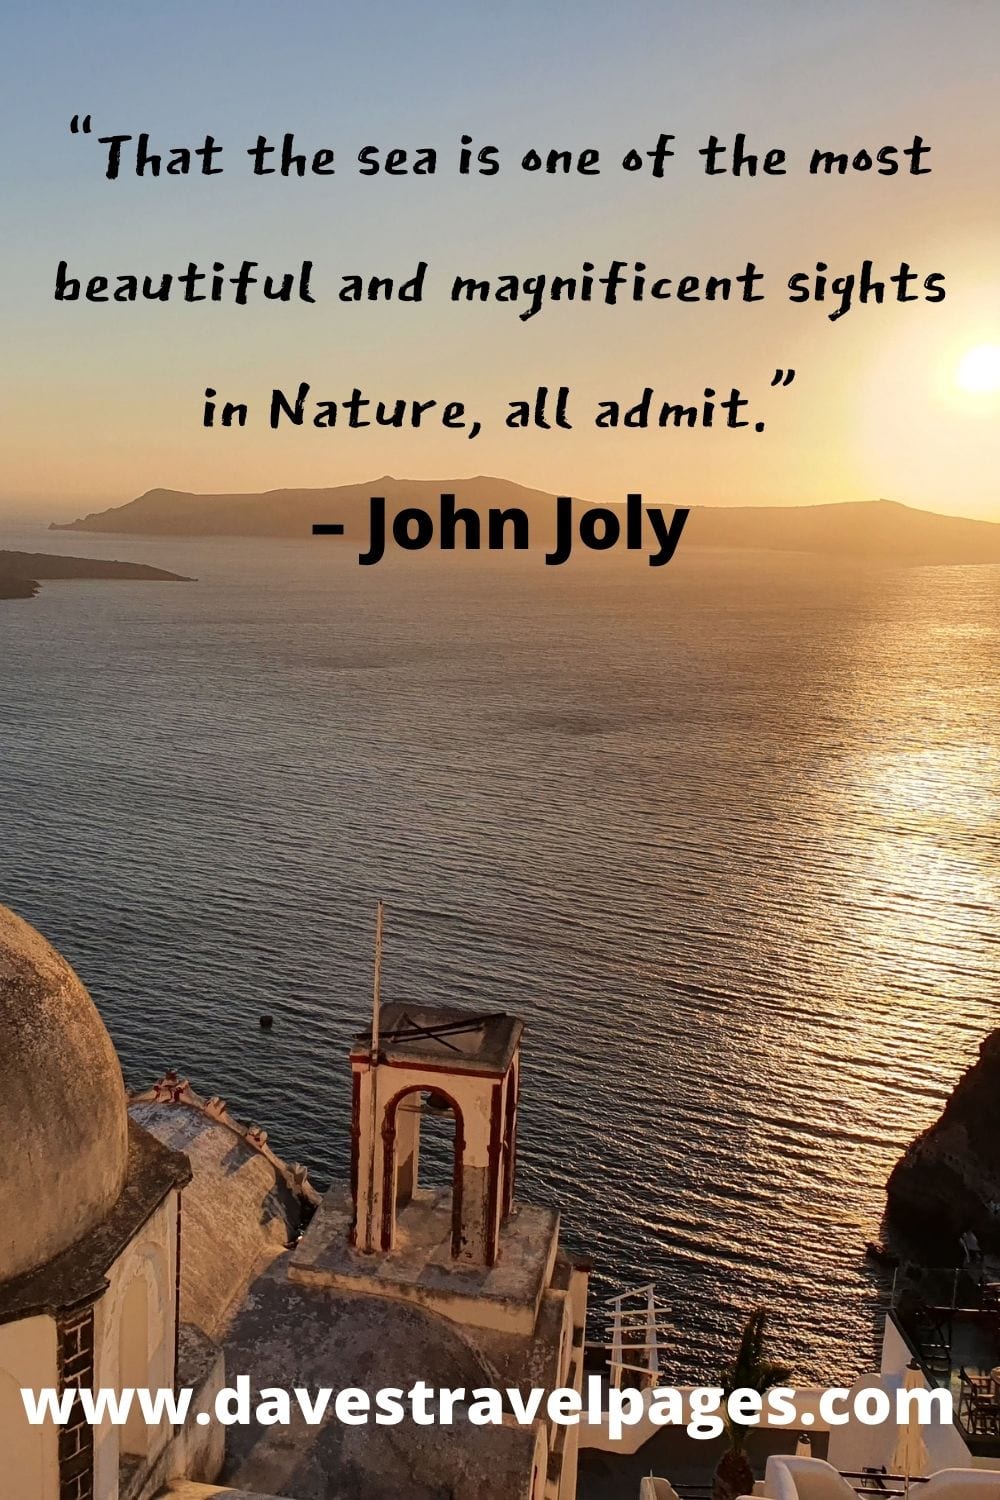 “That the sea is one of the most beautiful and magnificent sights in Nature, all admit.” – John Joly